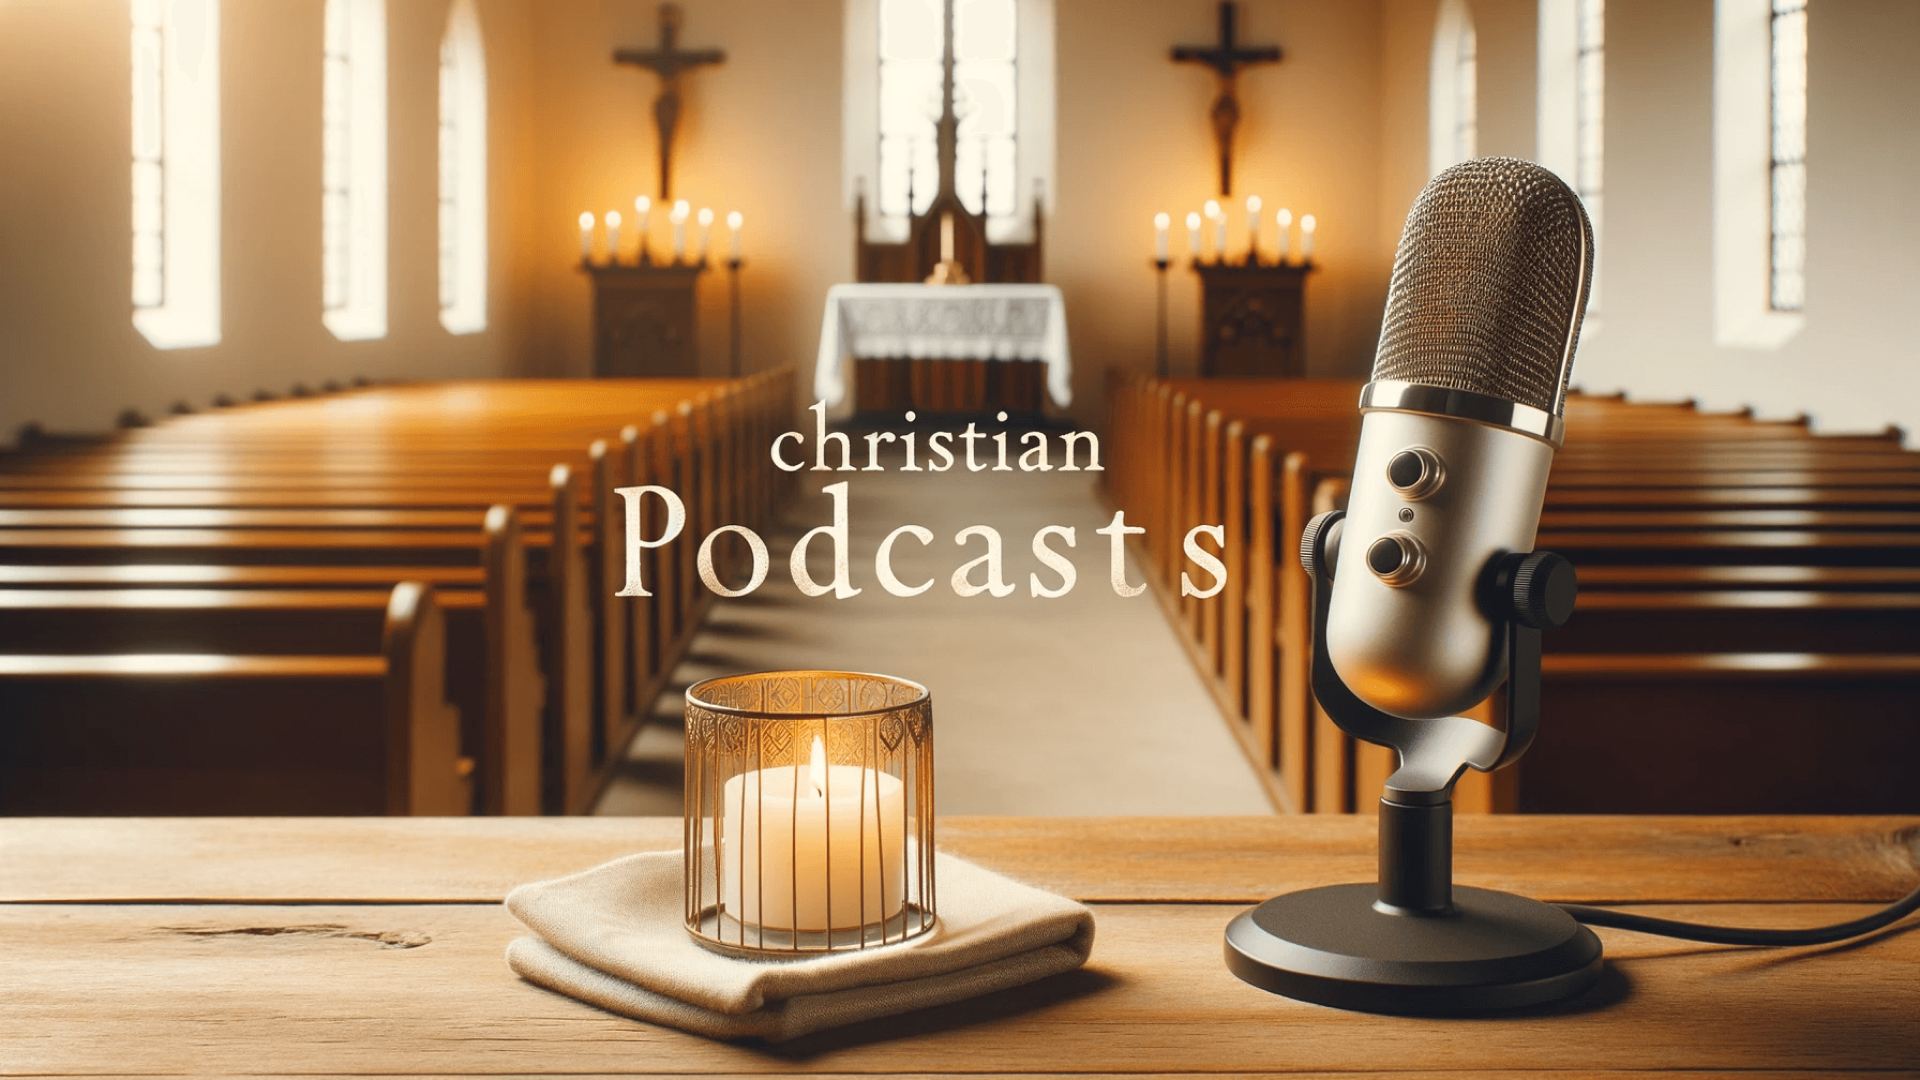 Top 10 Christian Podcasts on Spotify You Should Know